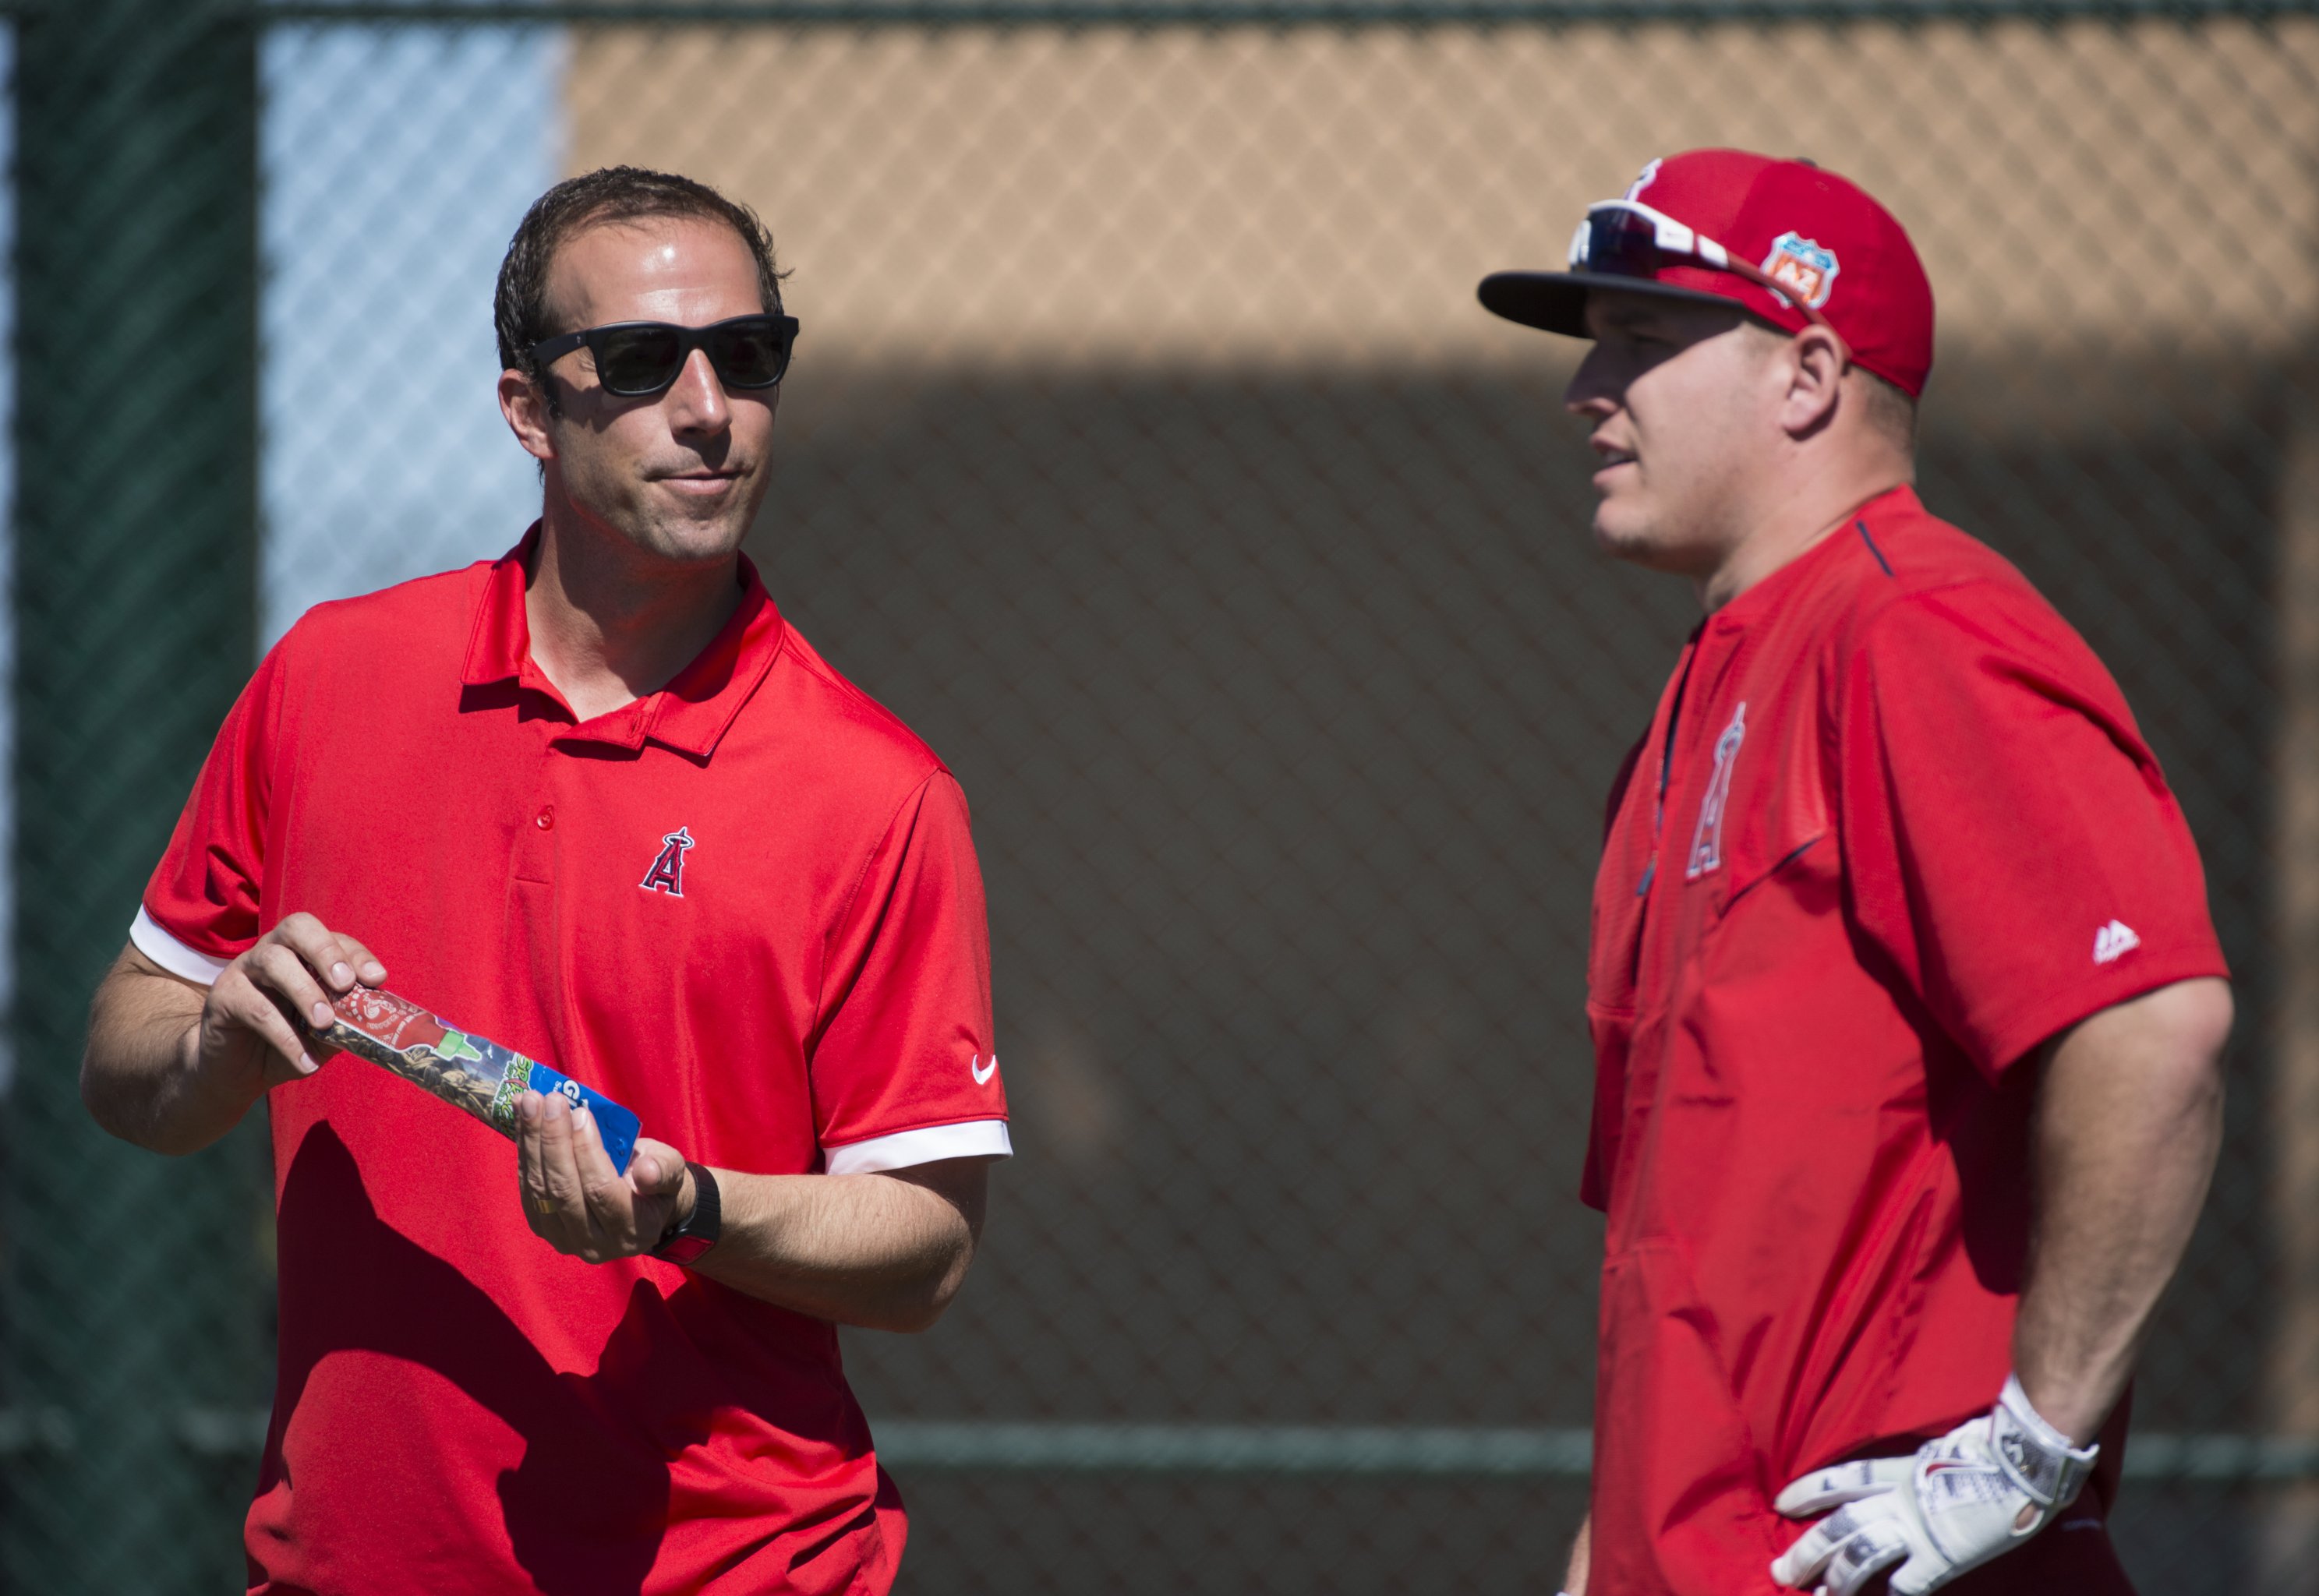 Mike Trout's high school baseball coach talks about the kind of